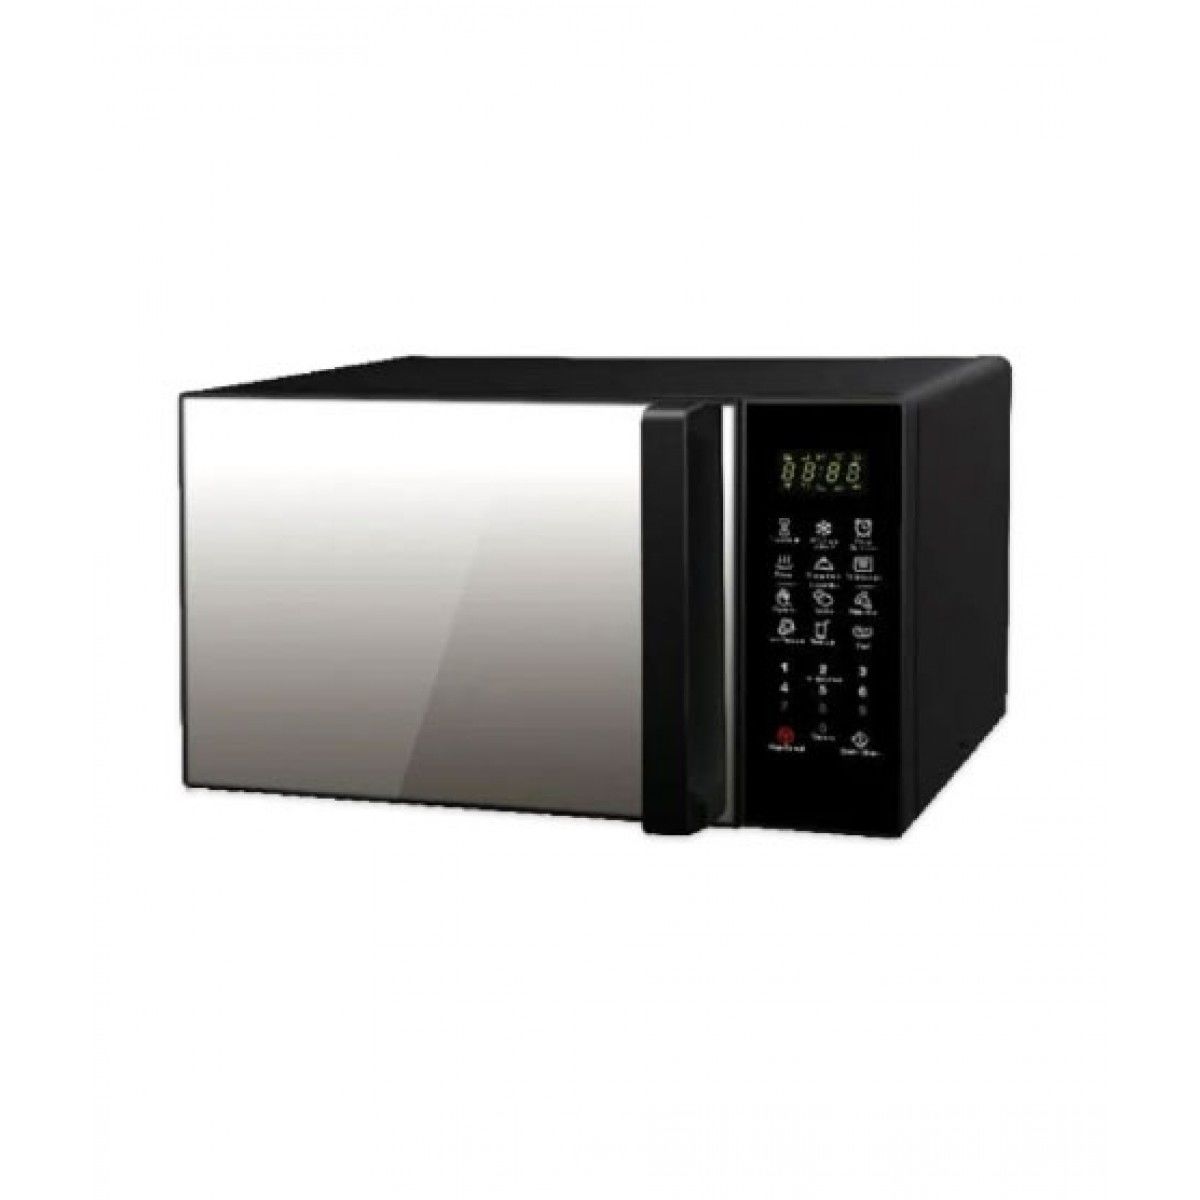 Orient Muffin Microwave Oven 30 Ltr Grill Black – Electronics,, Kitchen ...